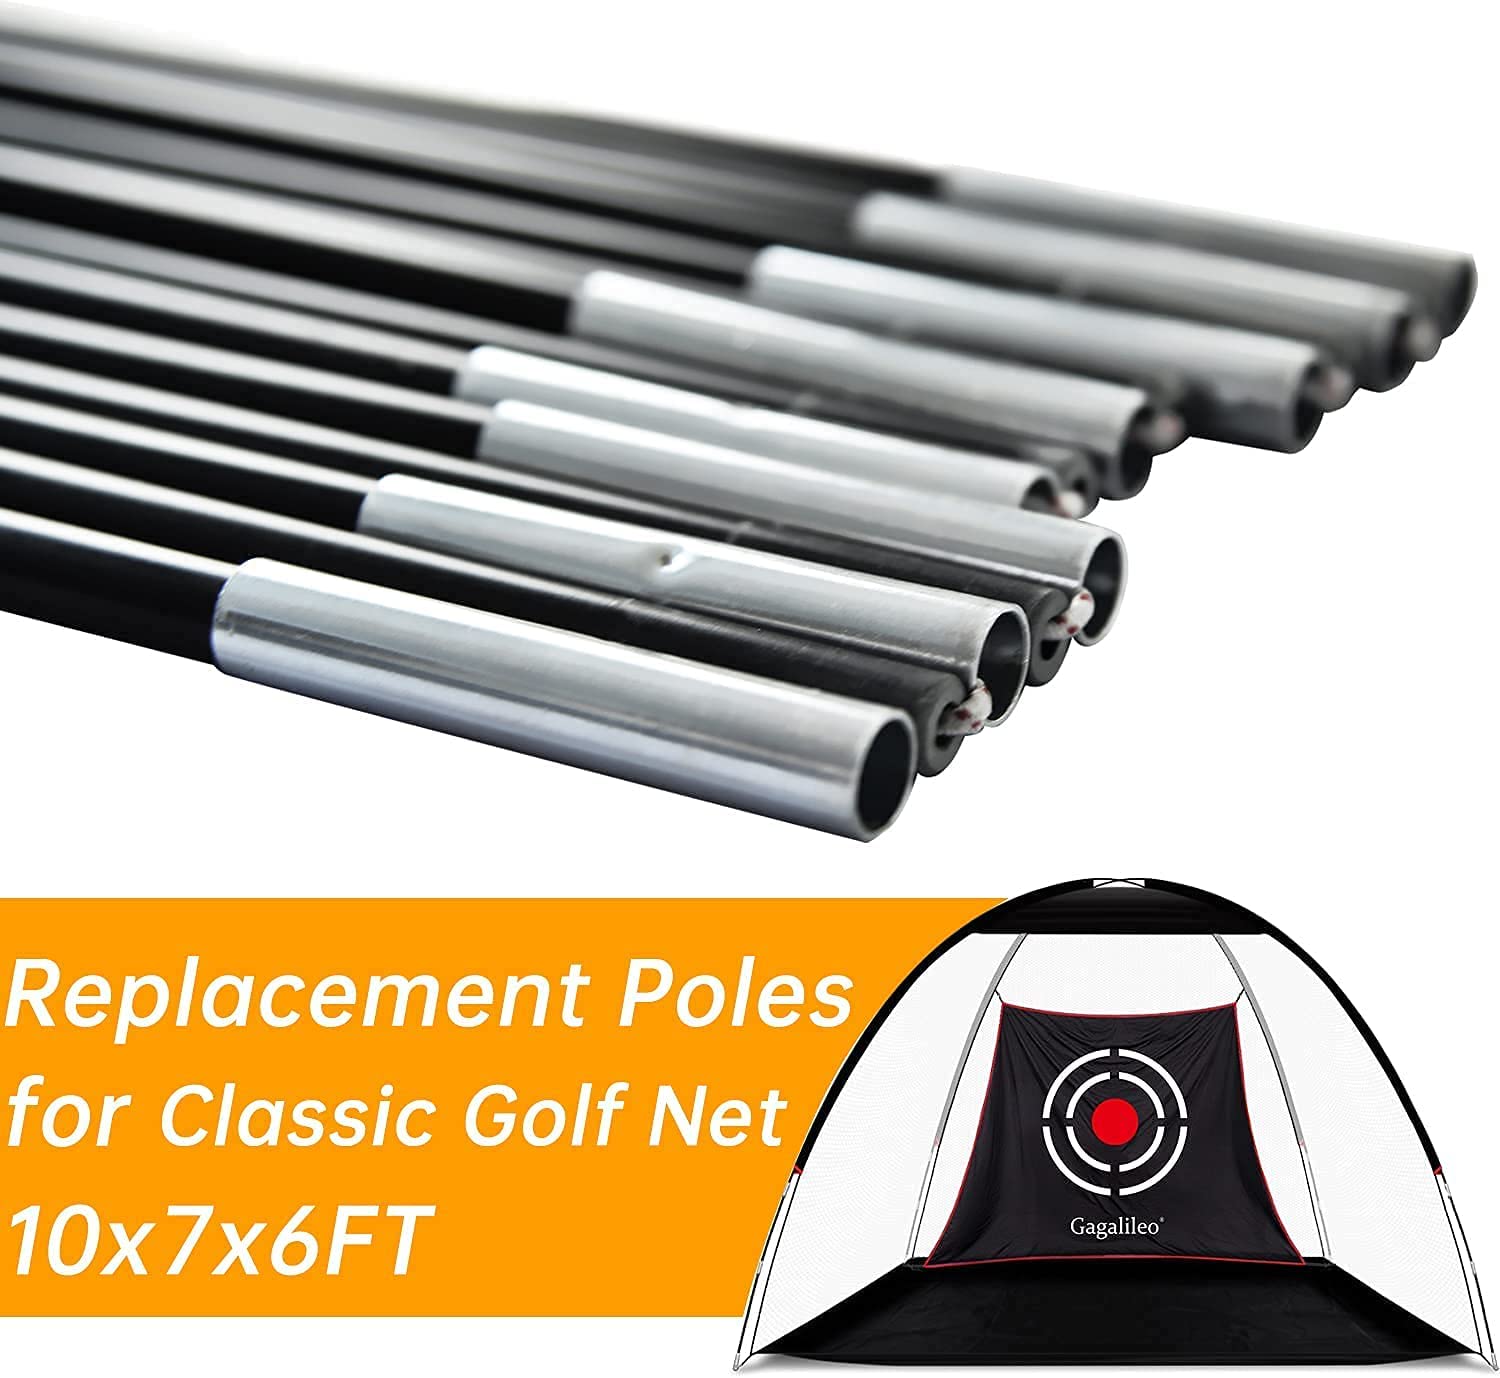 Gagalileo Golf Replacement Straight Poles for 10x7x6FT Golf Net-Classic Style, Fiberglass Replacement Rods 2pcs, GG-0003P